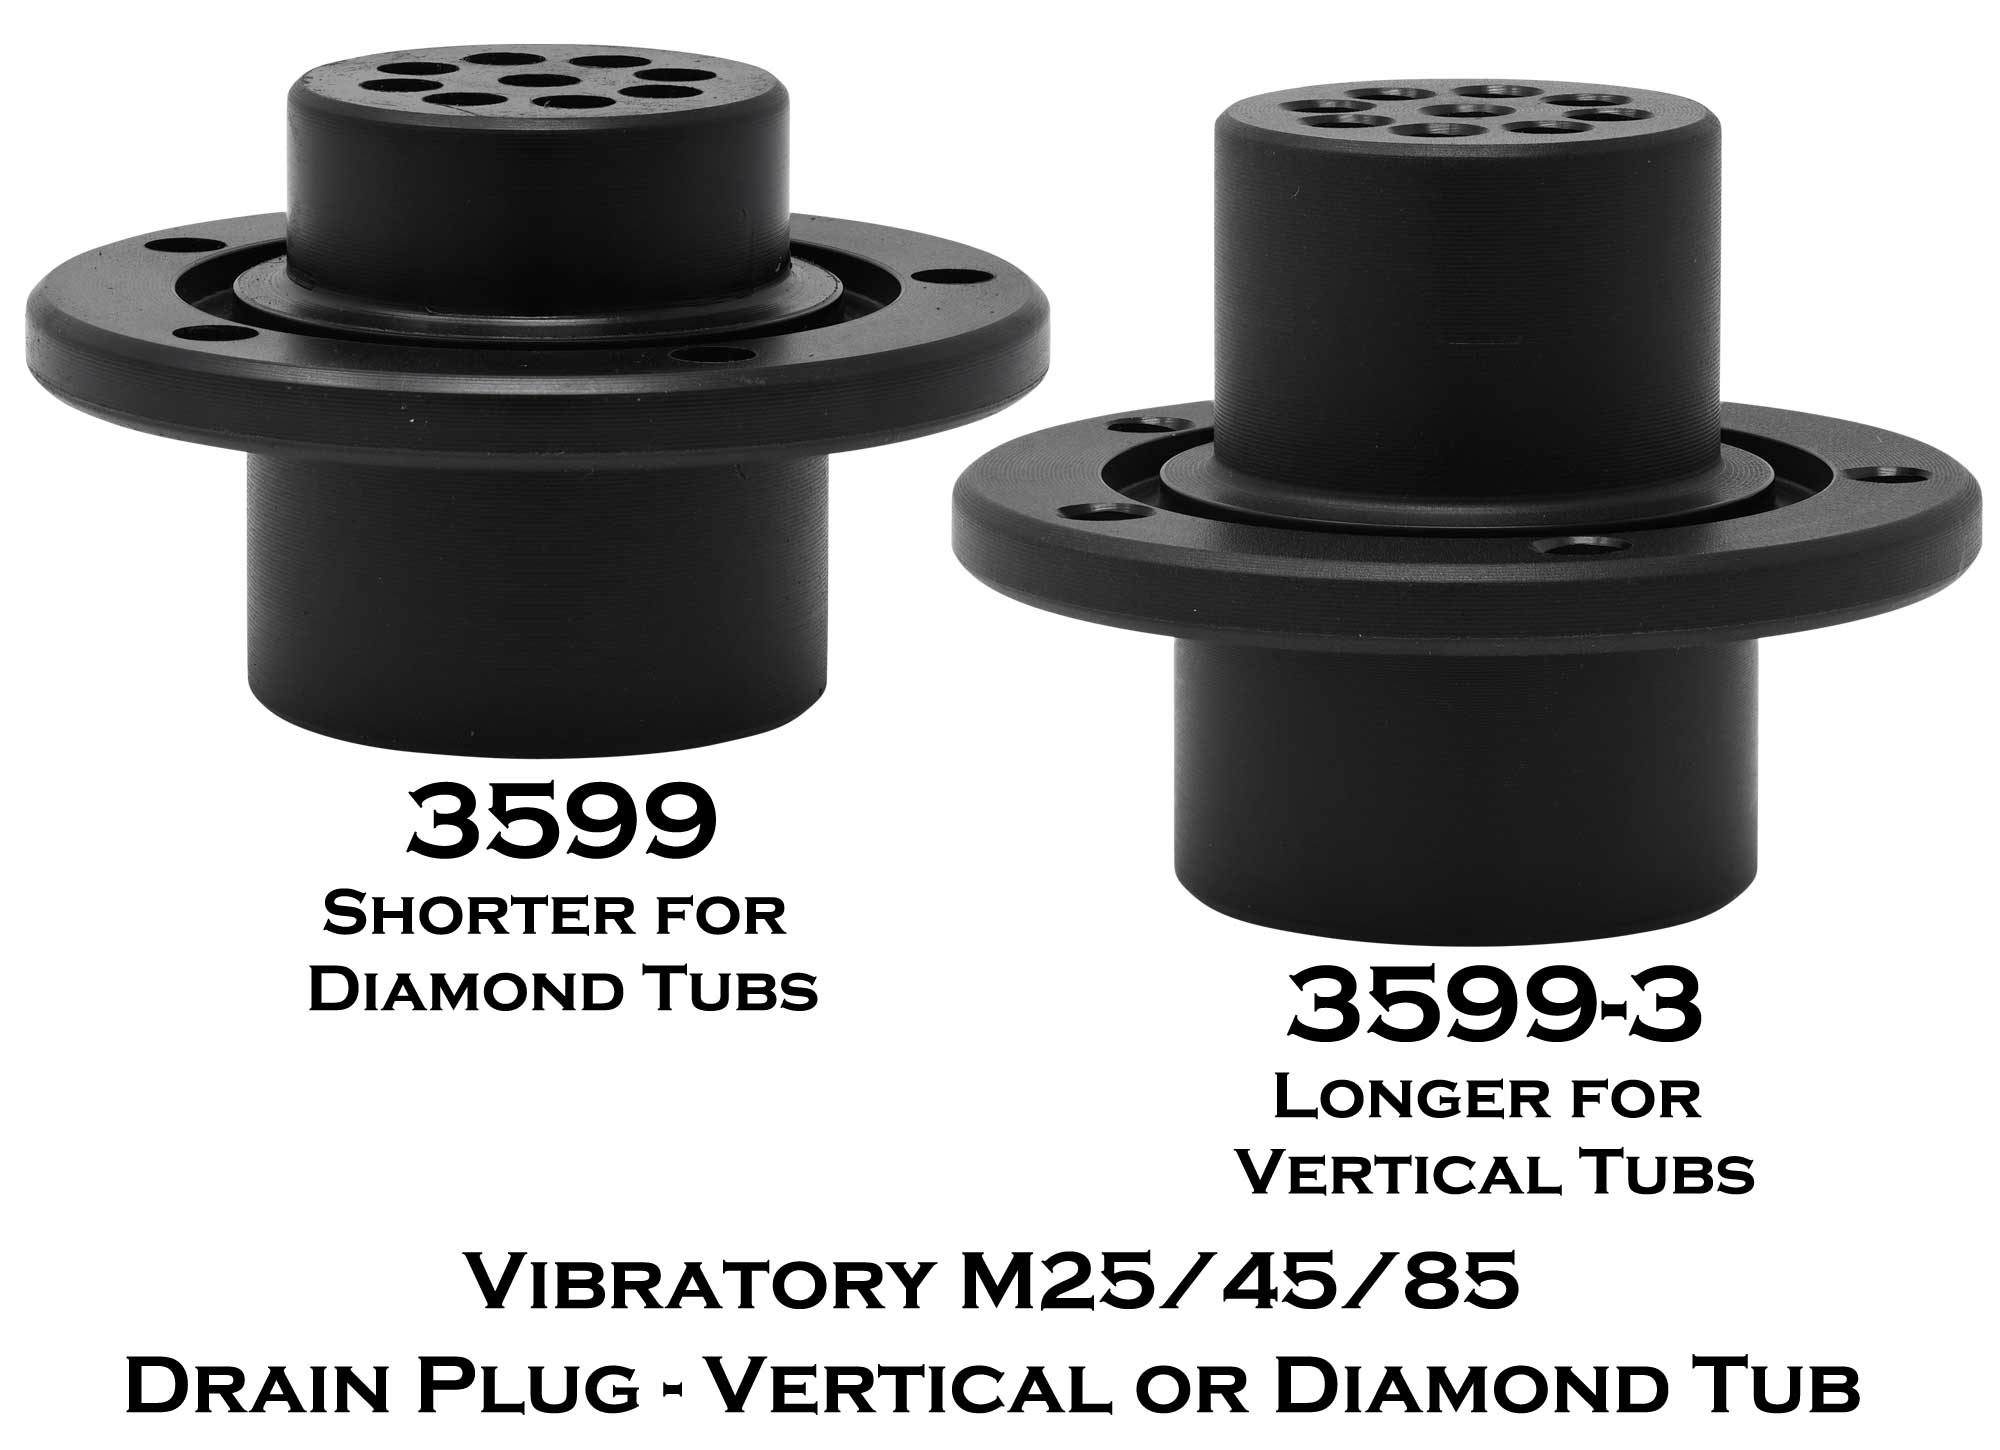 Diamond pattern drains are shorter than drains designed for vertical pattern tubs.